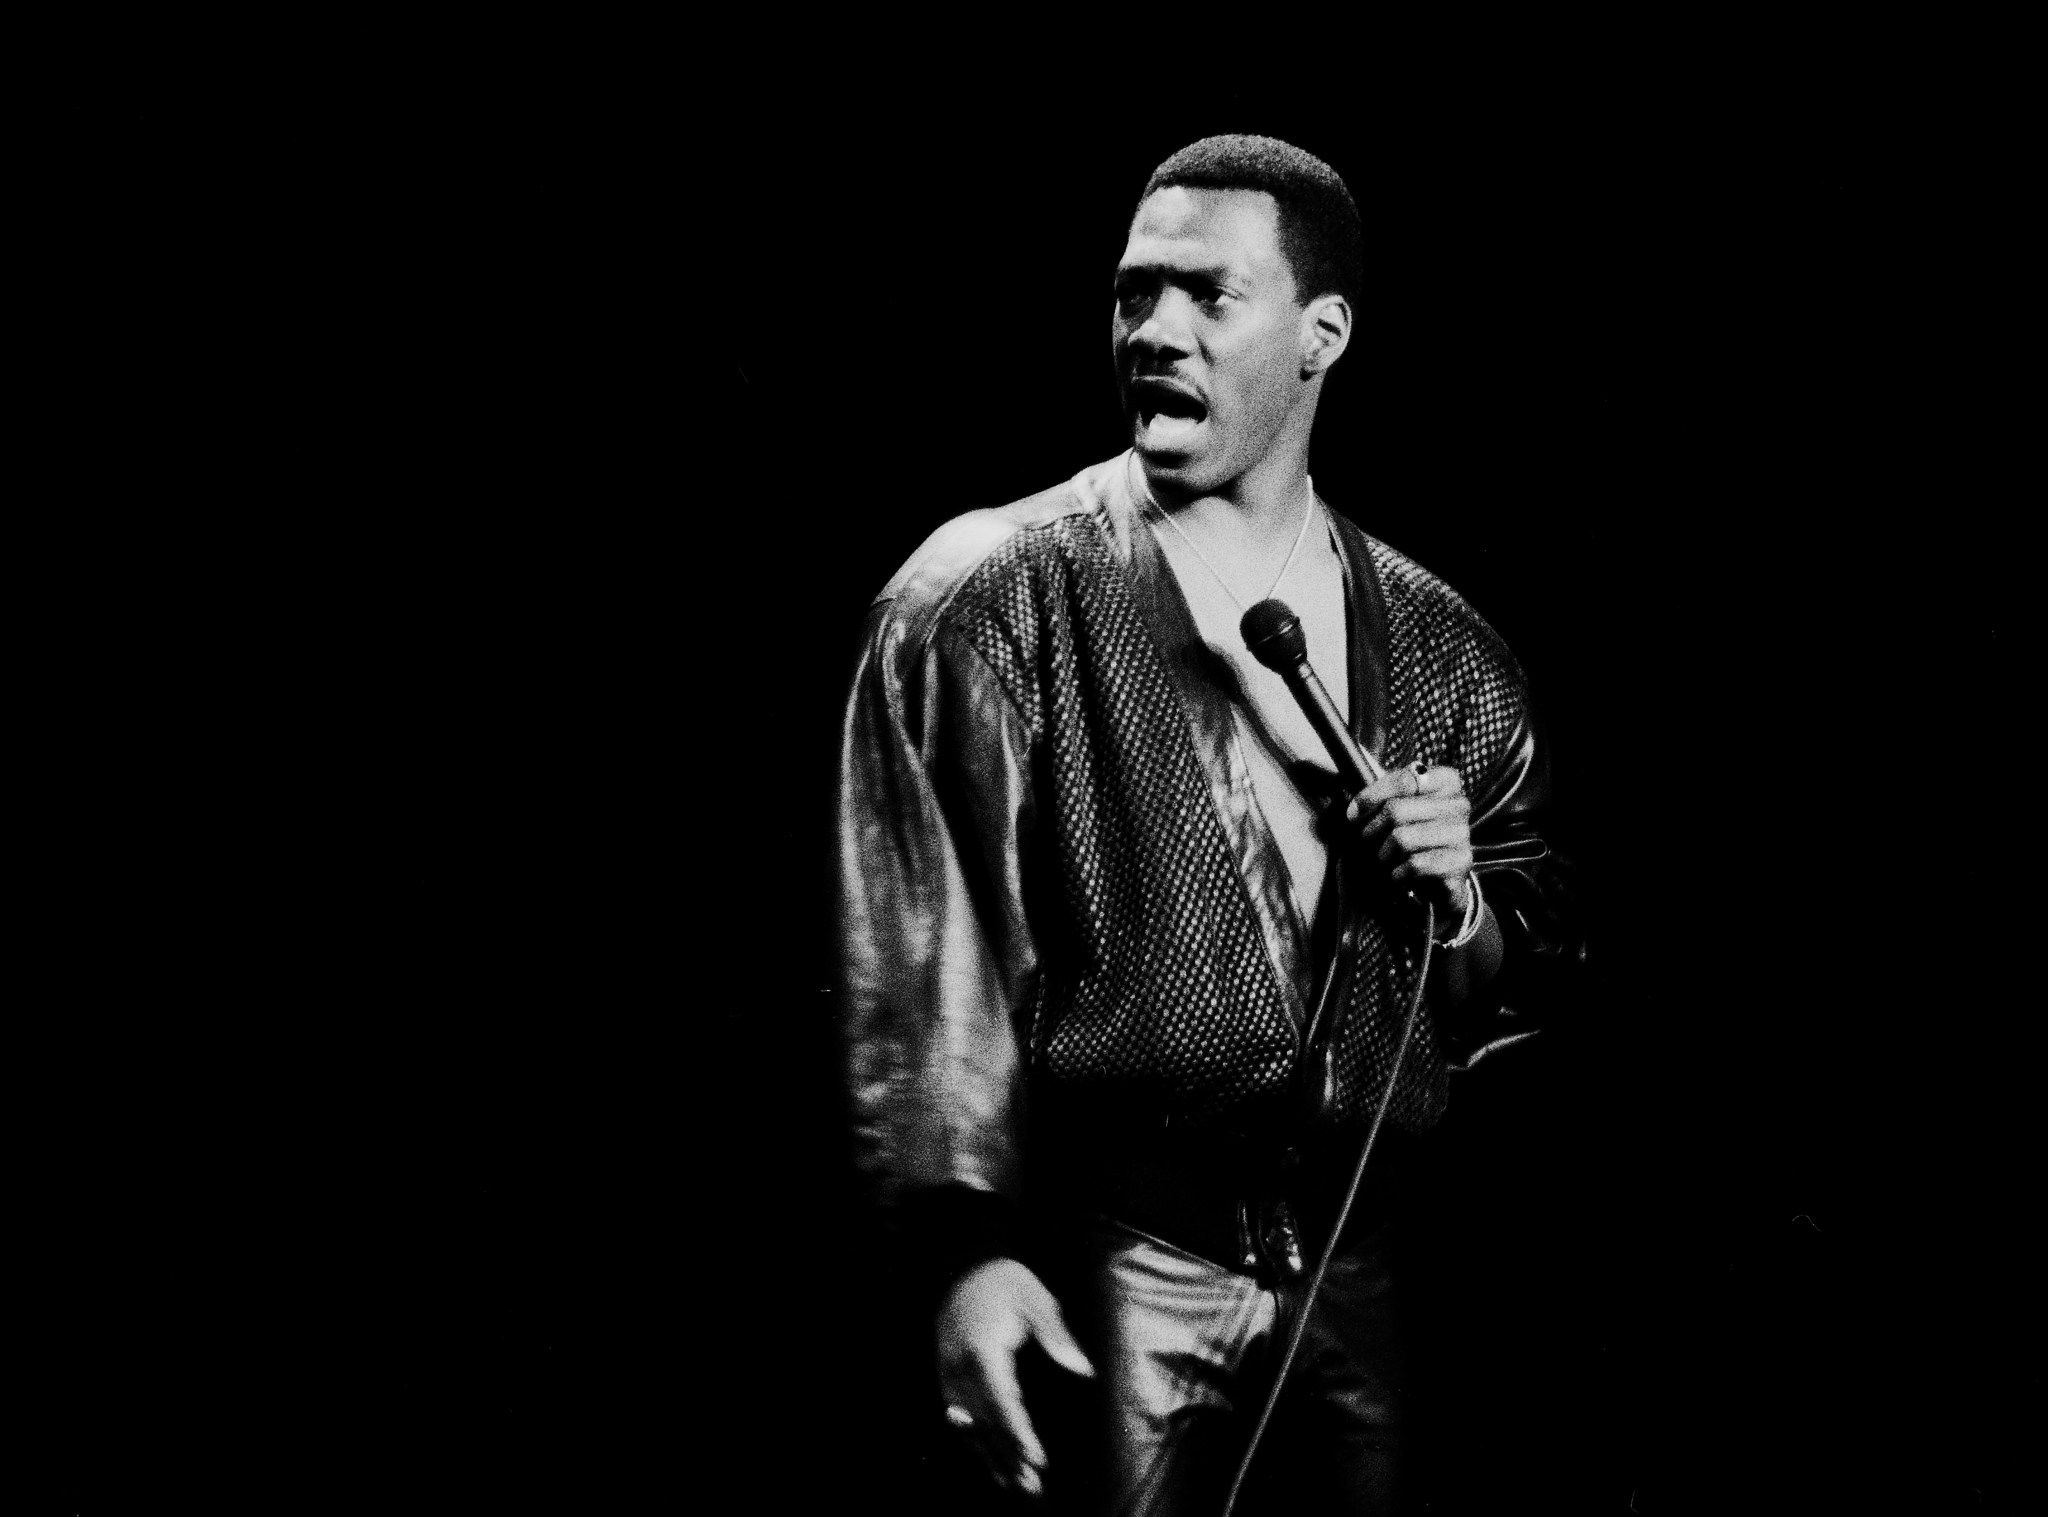 Comedian Eddie Murphy performs onstage at Madison Square Garden in New York City on October 13, 1987. (Photo by Gary Gershoff/Getty Images)